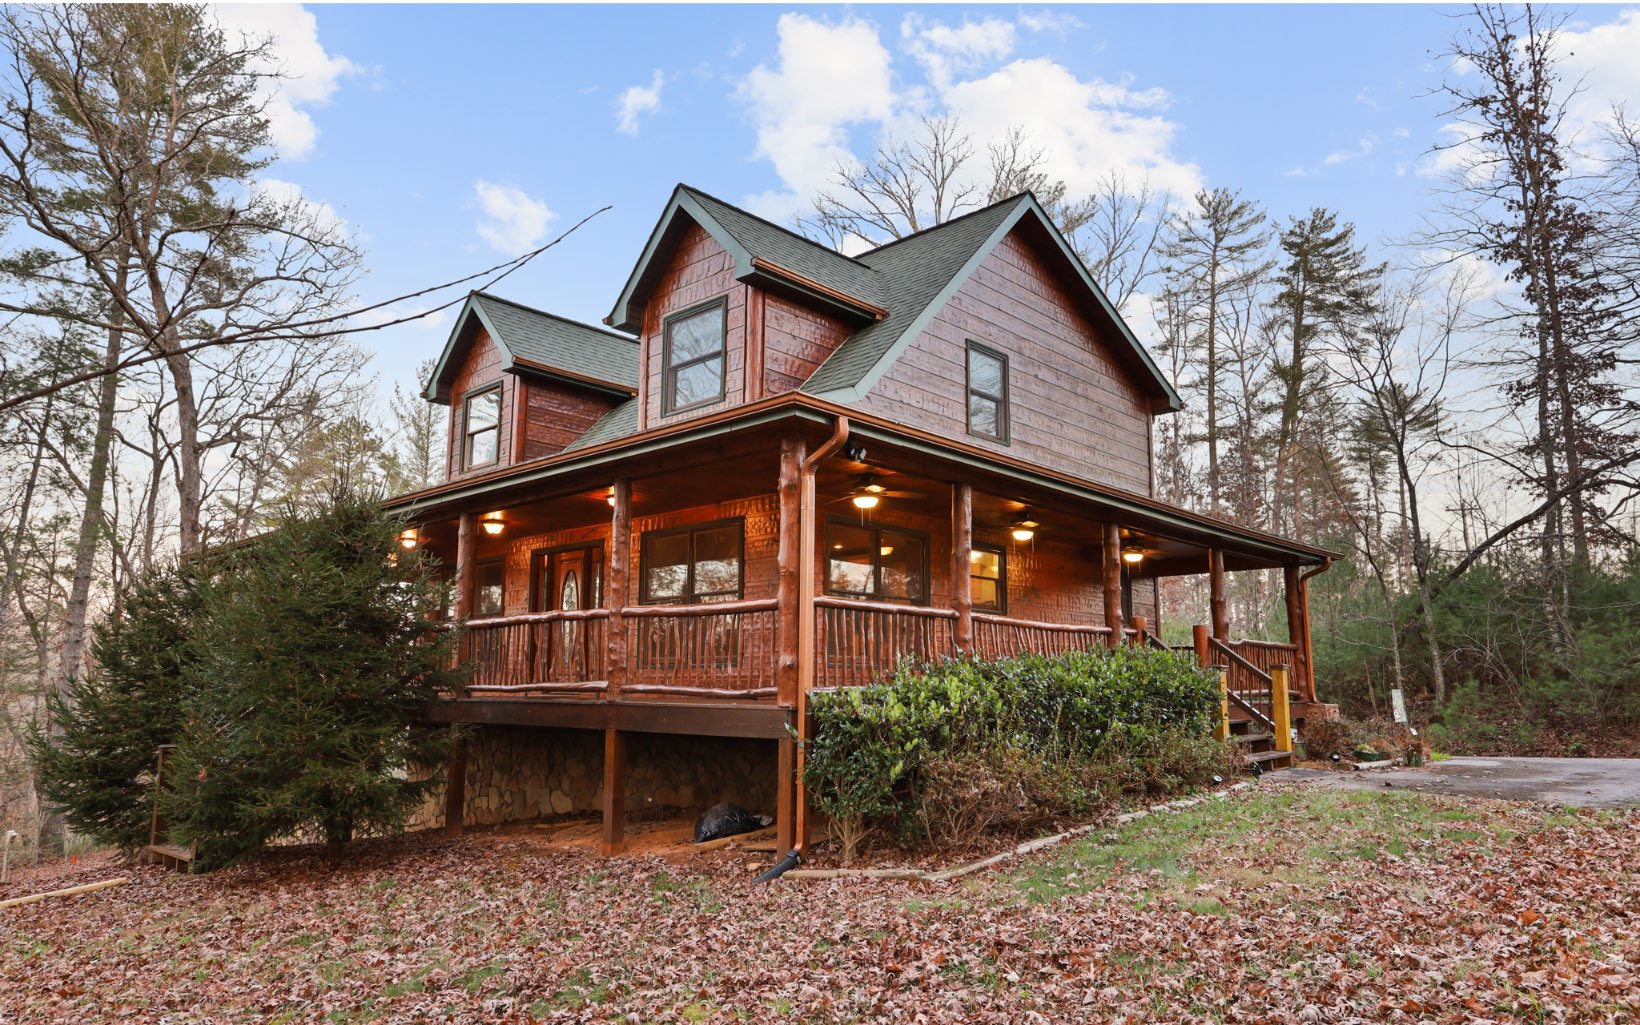 SENSATIONAL 3BR/3BA Hand Hewn Chink Cabin located in desirable Blue Ridge Ga.This 2 story cabin has an expansive covered wraparound porch and rests on 1.57 acres of beautiful unrestricted private land. A rustic beauty, adorned with cathedral ceilings, tongue and groove walls, ceilings and floors that showcases an open concept eat in kitchen with granite countertops, tile backsplash, and a center island. In the great room, enjoy breathtaking views and appreciate the expansive floor to ceiling stone fireplace that will take the chill out of the crisp cool mountain air. The roomy master suite on the main floor includes a newly remodeled full bath with a double vanity, walk in shower and jetted soak tub. A spectacular Mountain Laurel Staircase leads to the 2nd floor bedroom,loft and private bath. Downstairs is a finished basement complete with bedroom and full bath. The door leads out to a convenient one stall garage. Other features include a fire pit, level terrain, storage shed and a favorable circular driveway.